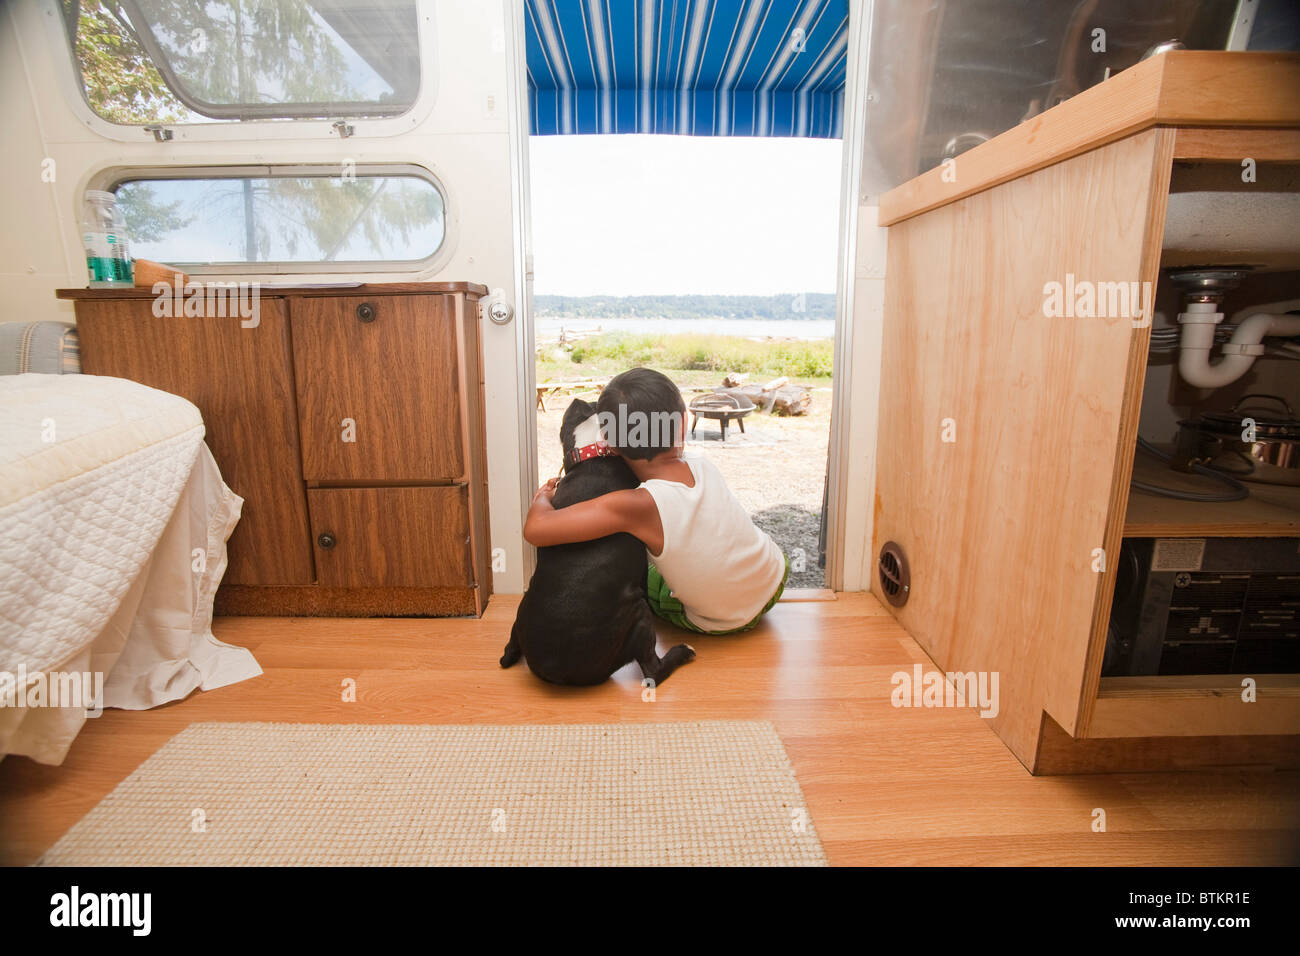 boy and dog sitting in camper doorway Stock Photo